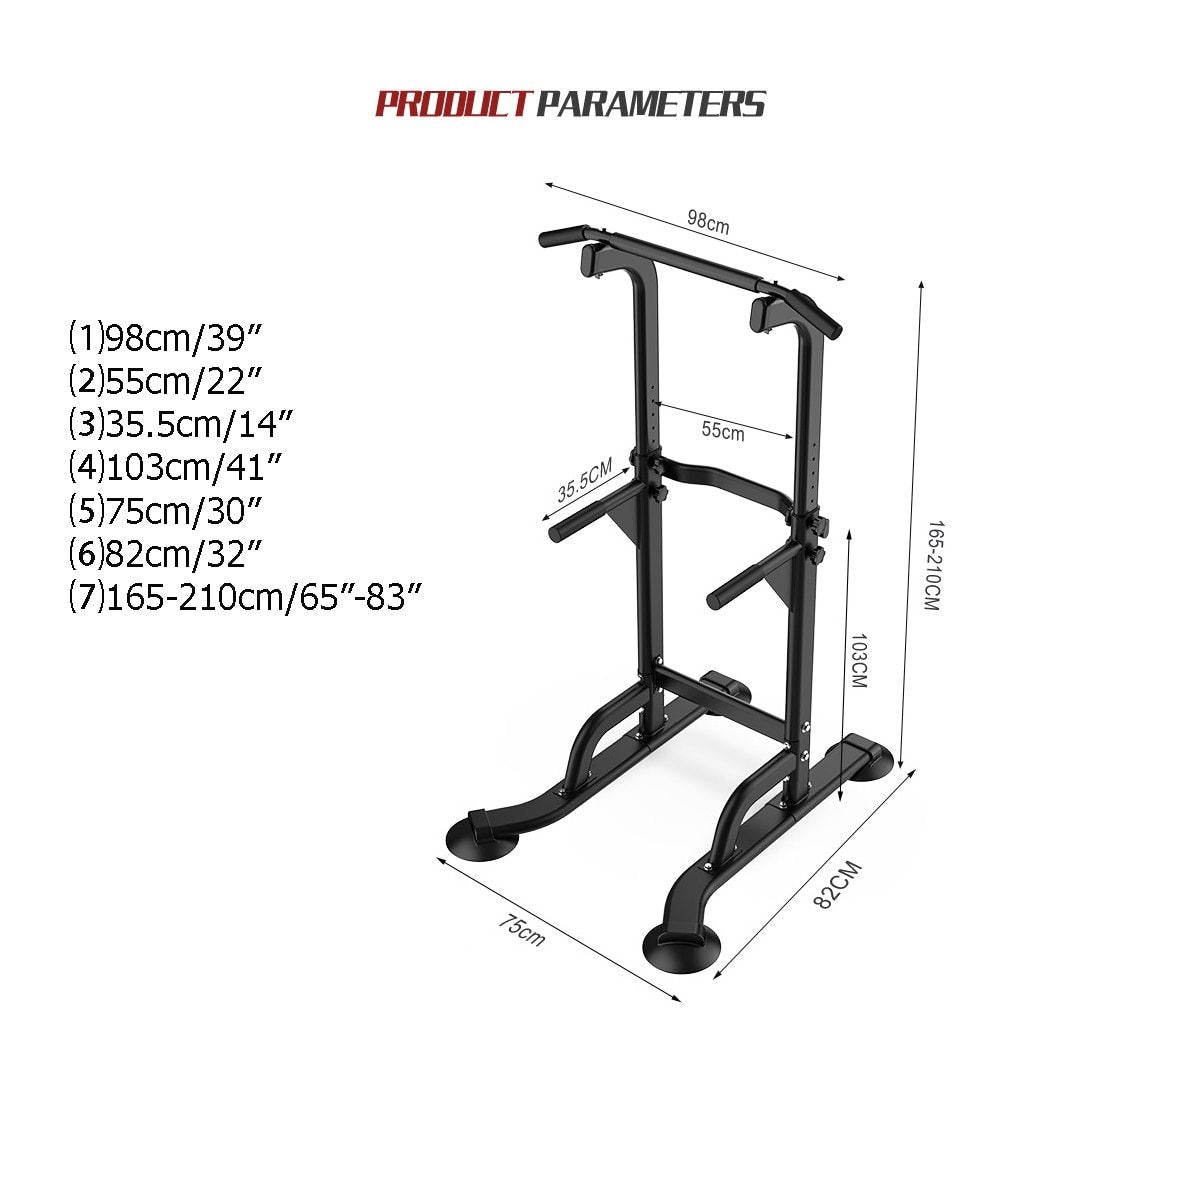 fitness fitness equipment gym equipment workout aerobics pull up tower heavy duty dip station portable dip bar gym gym near me